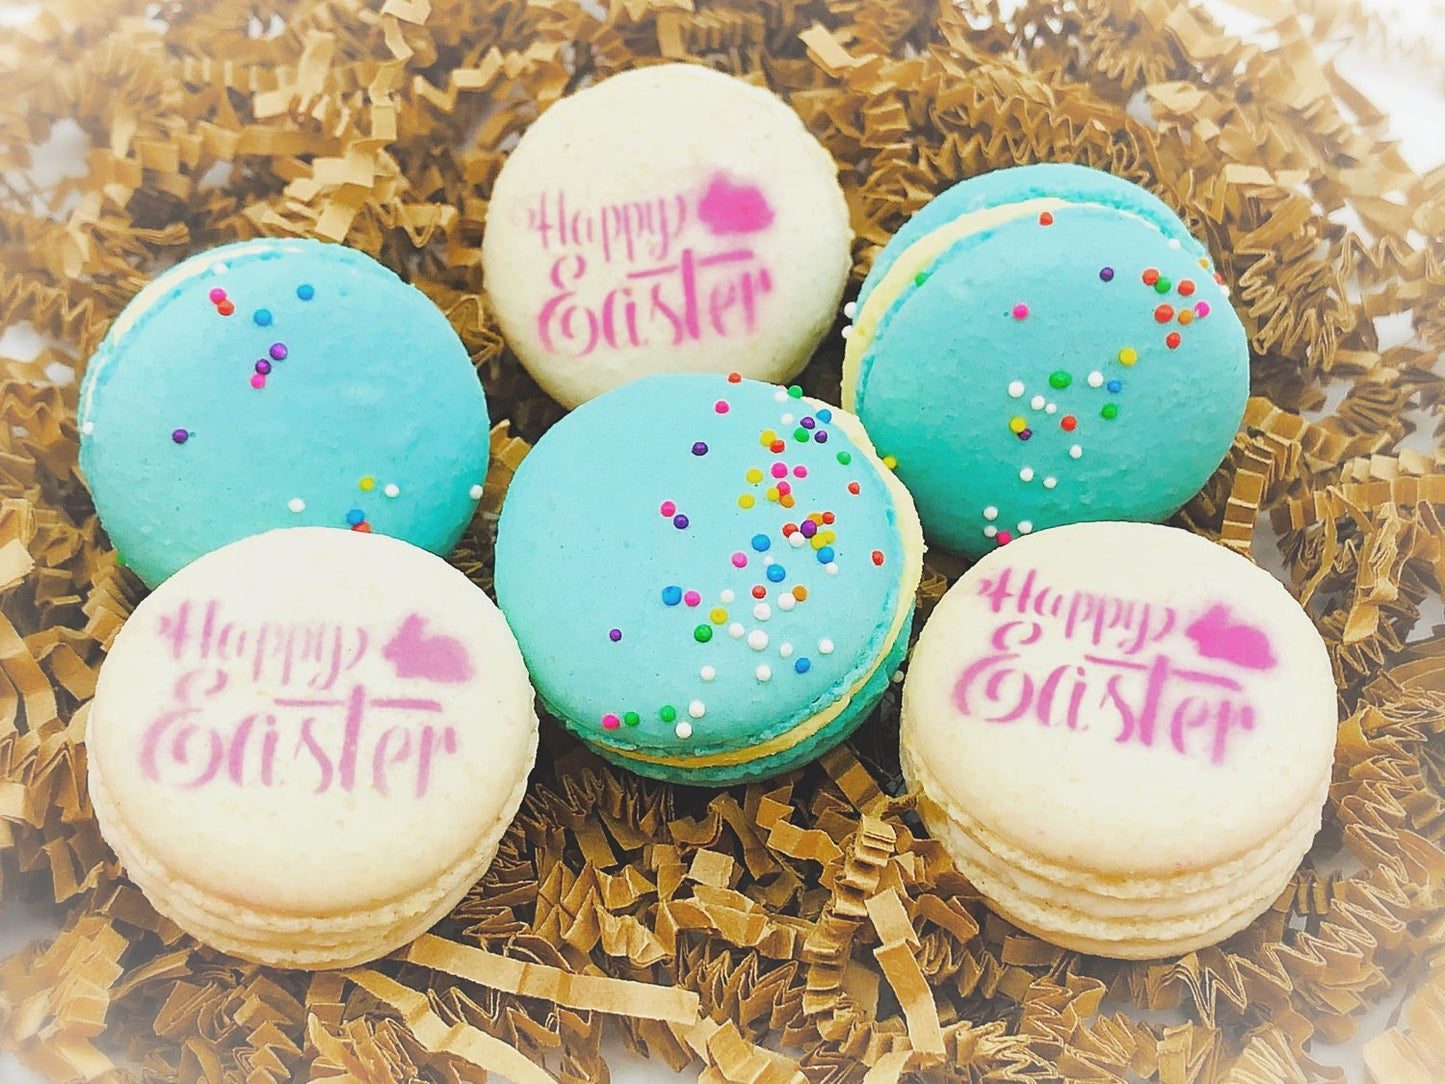 Happy Easter 6 Pack Macarons | Vanilla and Green Rainbow Macarons - Macaron Centrale